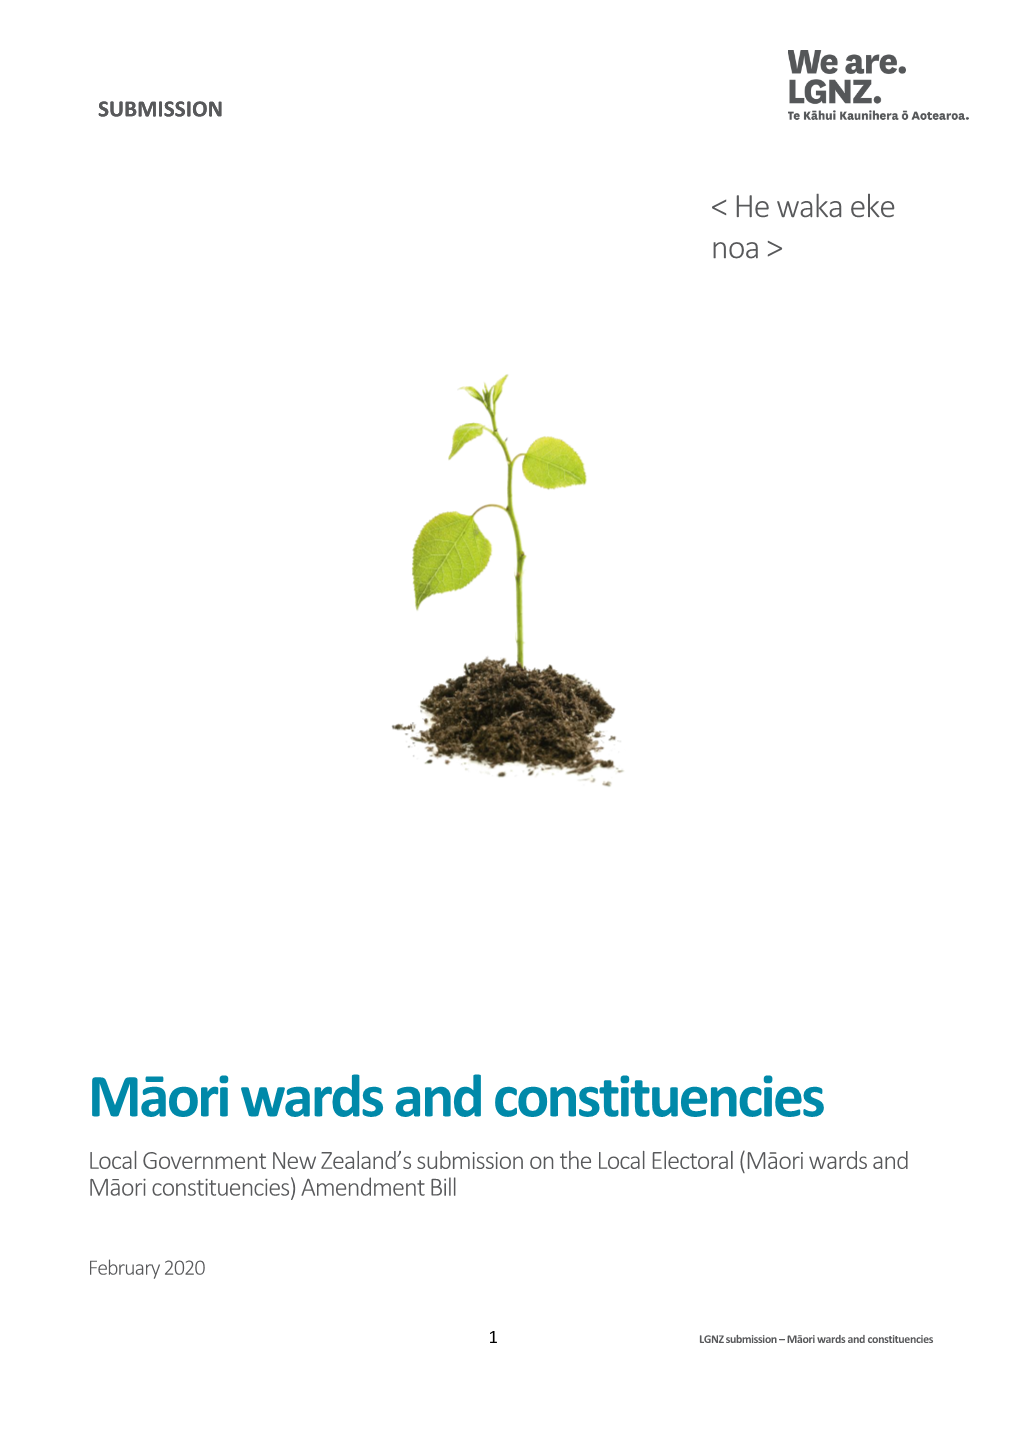 Māori Wards and Constituencies Local Government New Zealand’S Submission on the Local Electoral (Māori Wards and Māori Constituencies) Amendment Bill